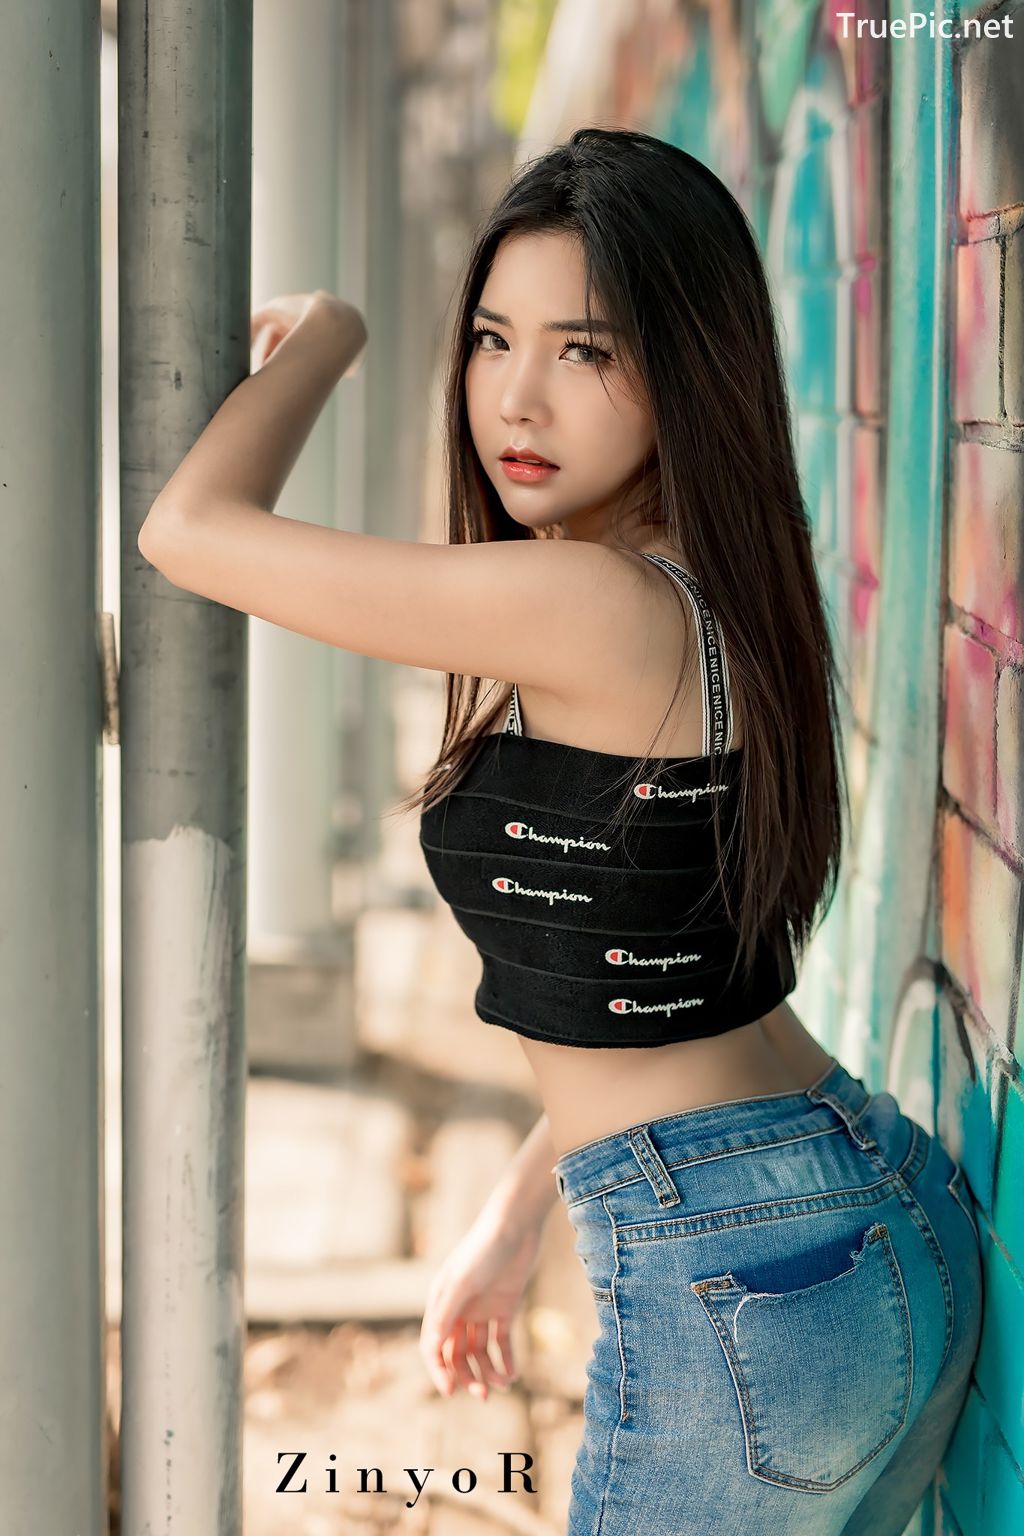 Image-Thailand-Model-Phitchamol-Srijantanet-Black-Crop-Top-and-Jean-TruePic.net- Picture-25